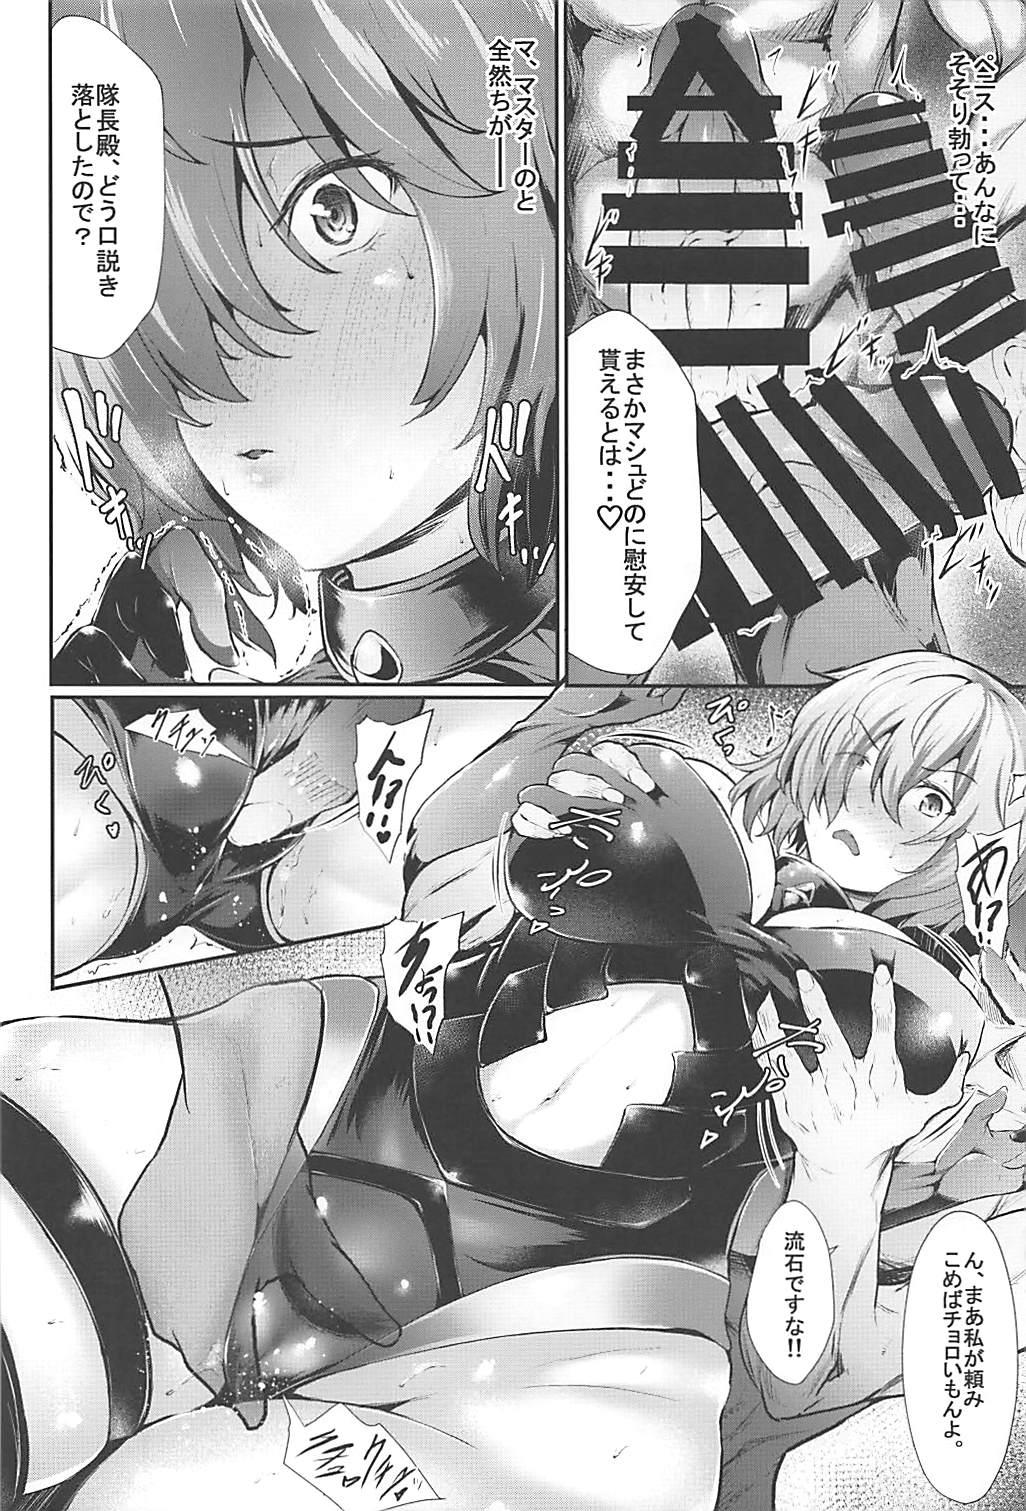 Butt Sex Nympho-mania? - Fate grand order Amateurs - Page 5